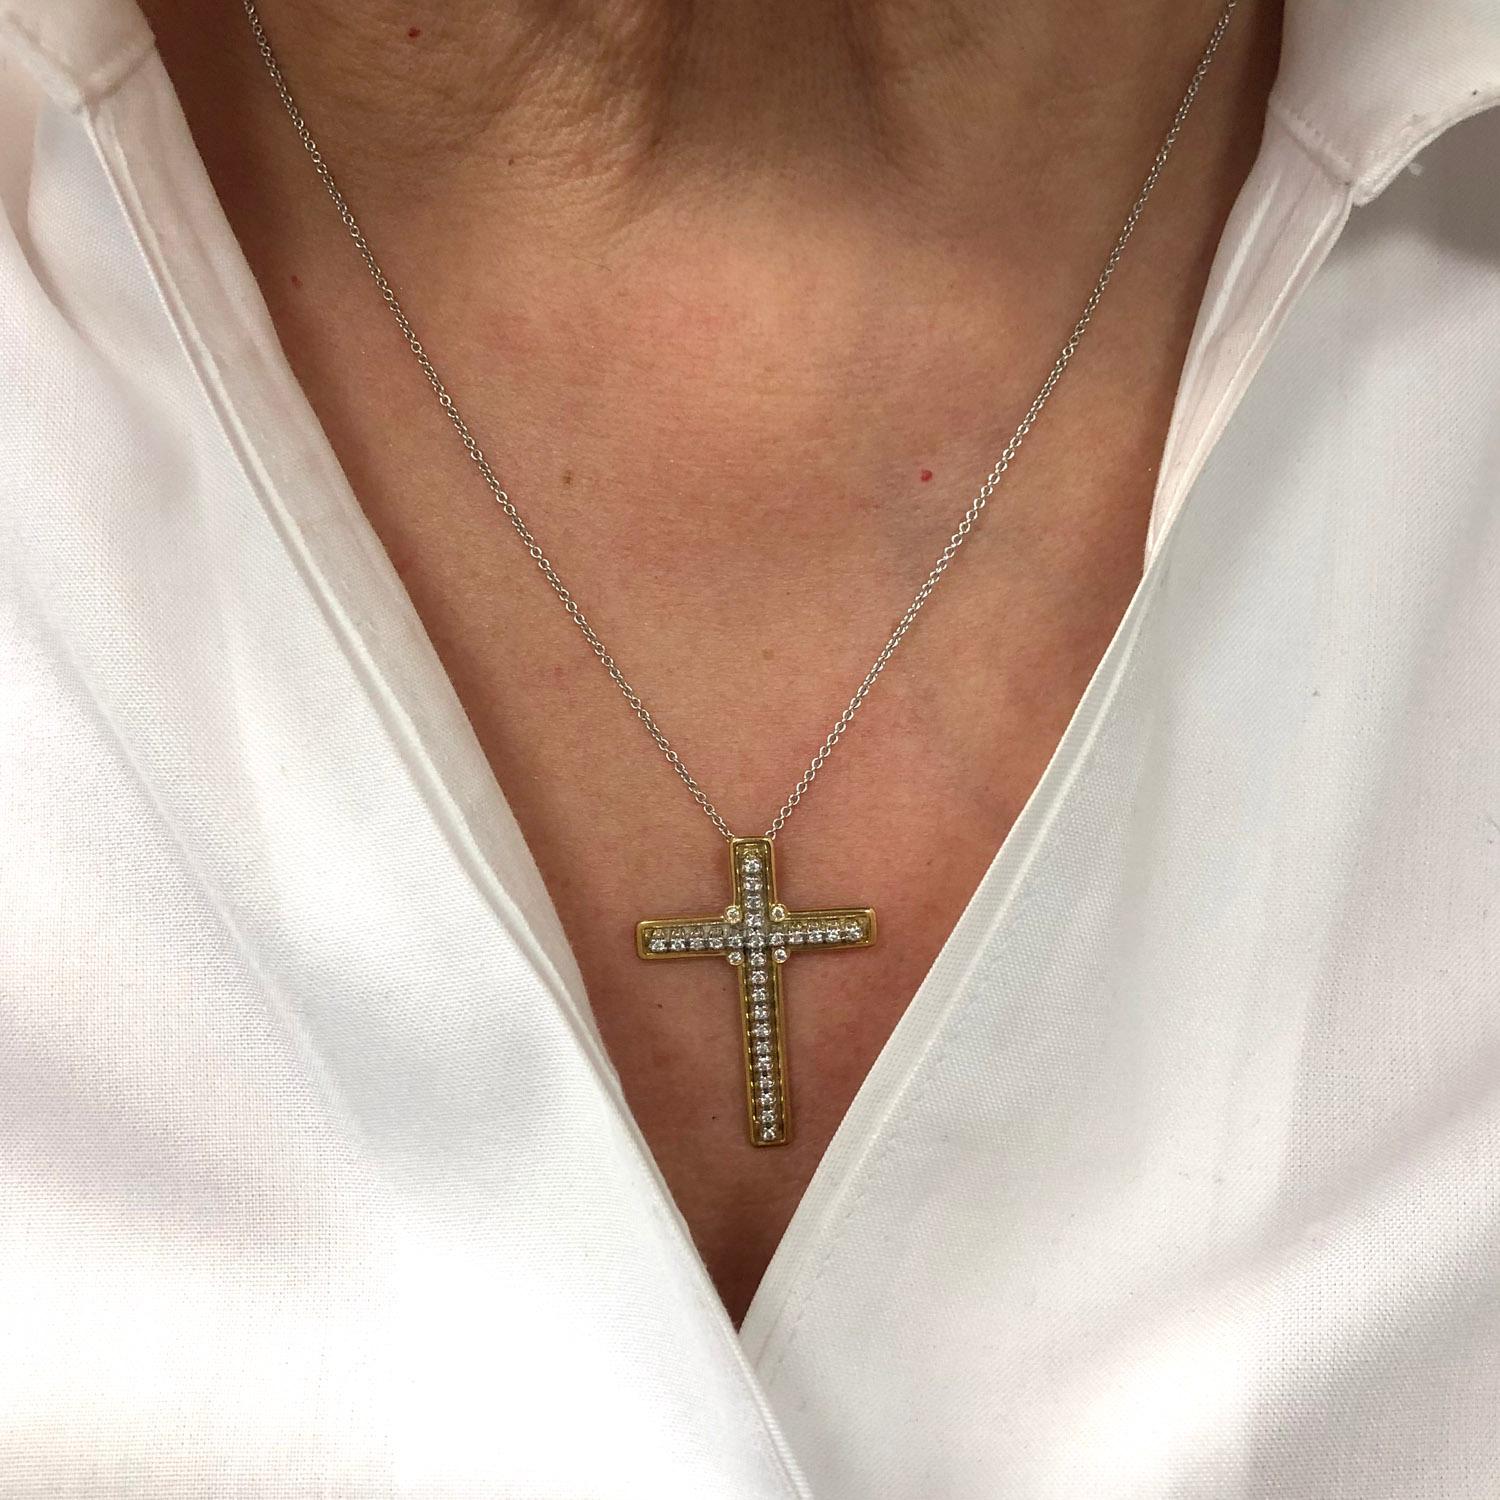 18Kt White* & Yellow gold diamond cross pendant on an 18 Kt gold chain. 

30 Round brilliant cut diamonds total weight:  0.22 ct clarity VS, color F-G

MADE IN MONTREAL BY JOAILLERIE ST-ONGE
Each piece is inspired by the past but adapted to today’s